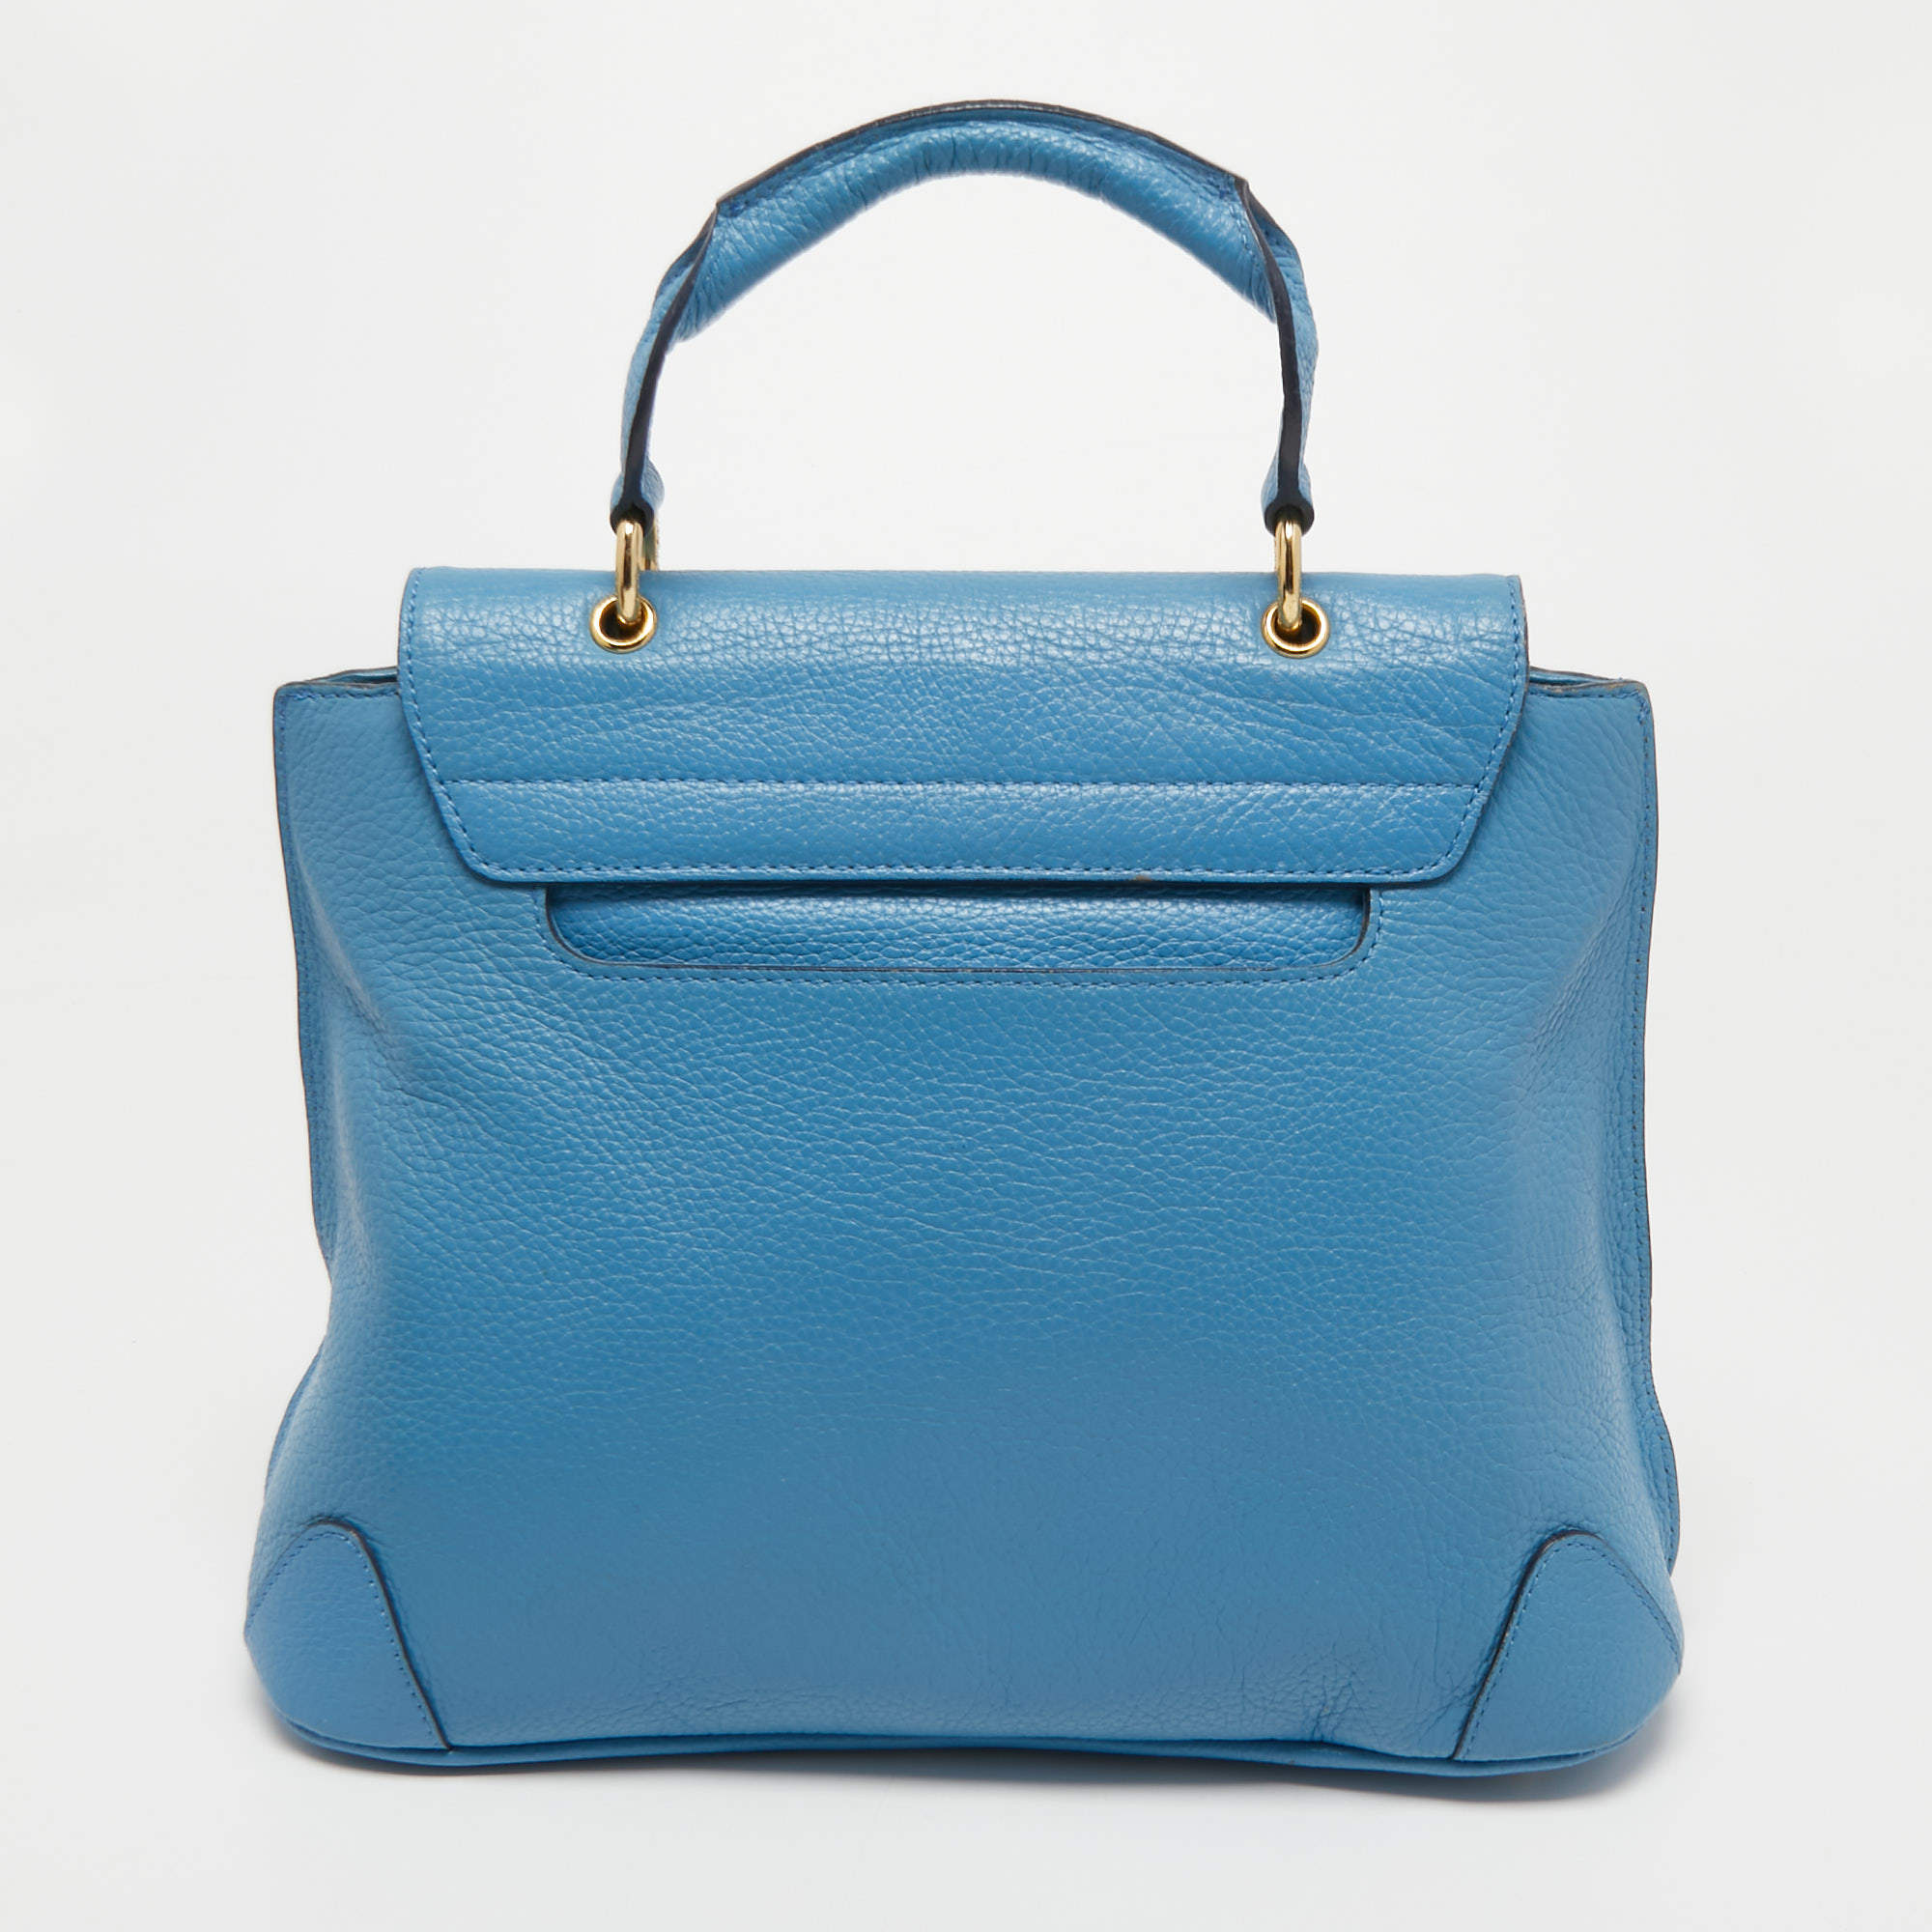 Mcm Light Blue Leather First Lady Top Handle Bag